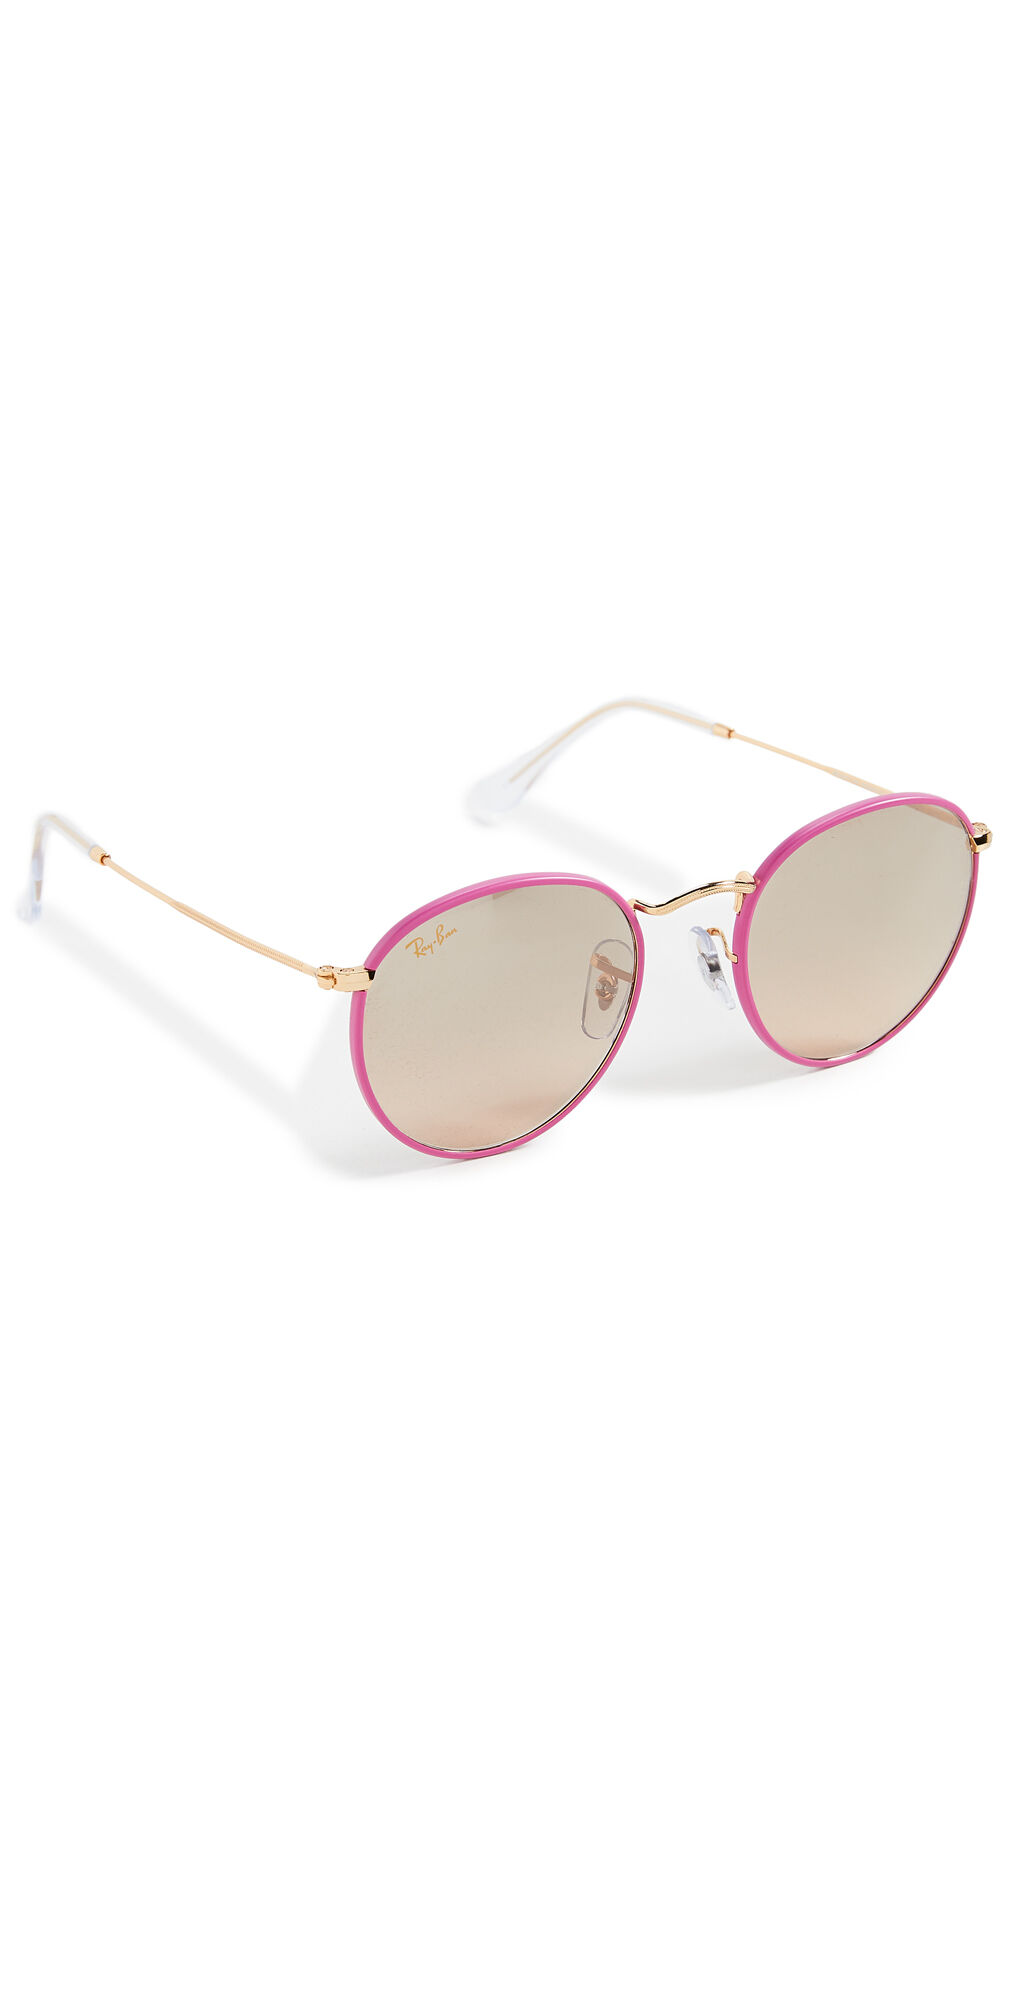 Ray-Ban Full Color Round Sunglasses Pink Mirror/Gradient Grey One Size  Pink Mirror/Gradient Grey  size:One Size